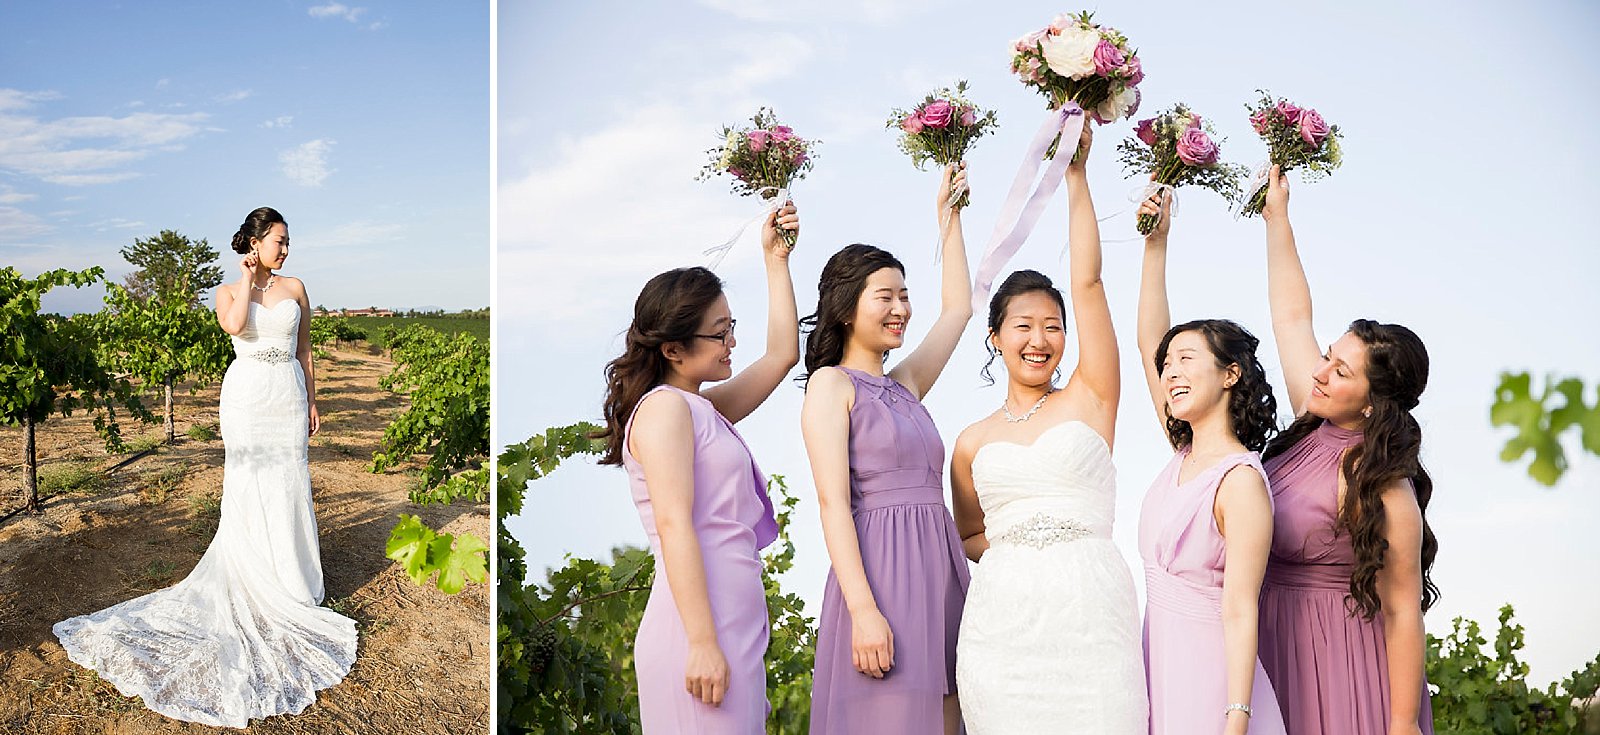 bride and bridesmaids hold Willas Wreaths bouquets for Falkner Winery wedding day